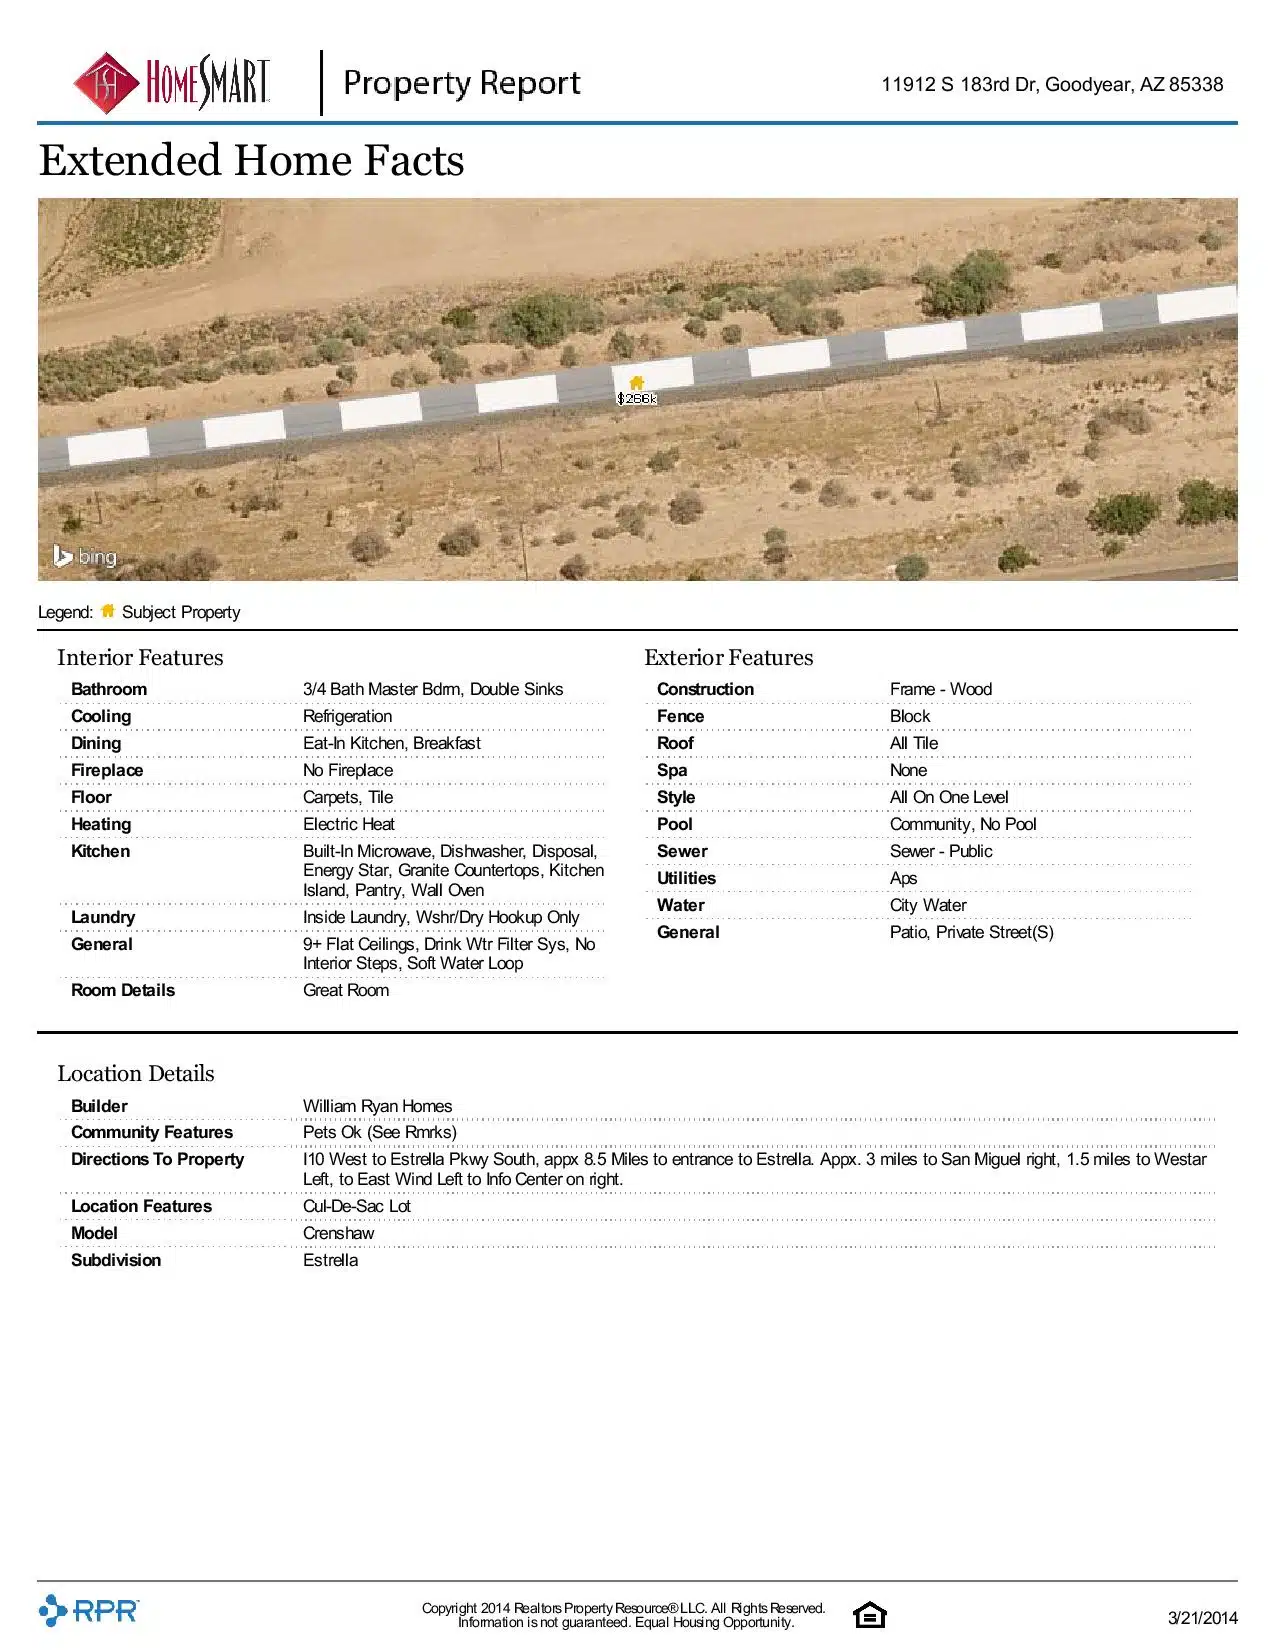 11912-S-183rd-Dr-Goodyear-AZ-85338-page-004